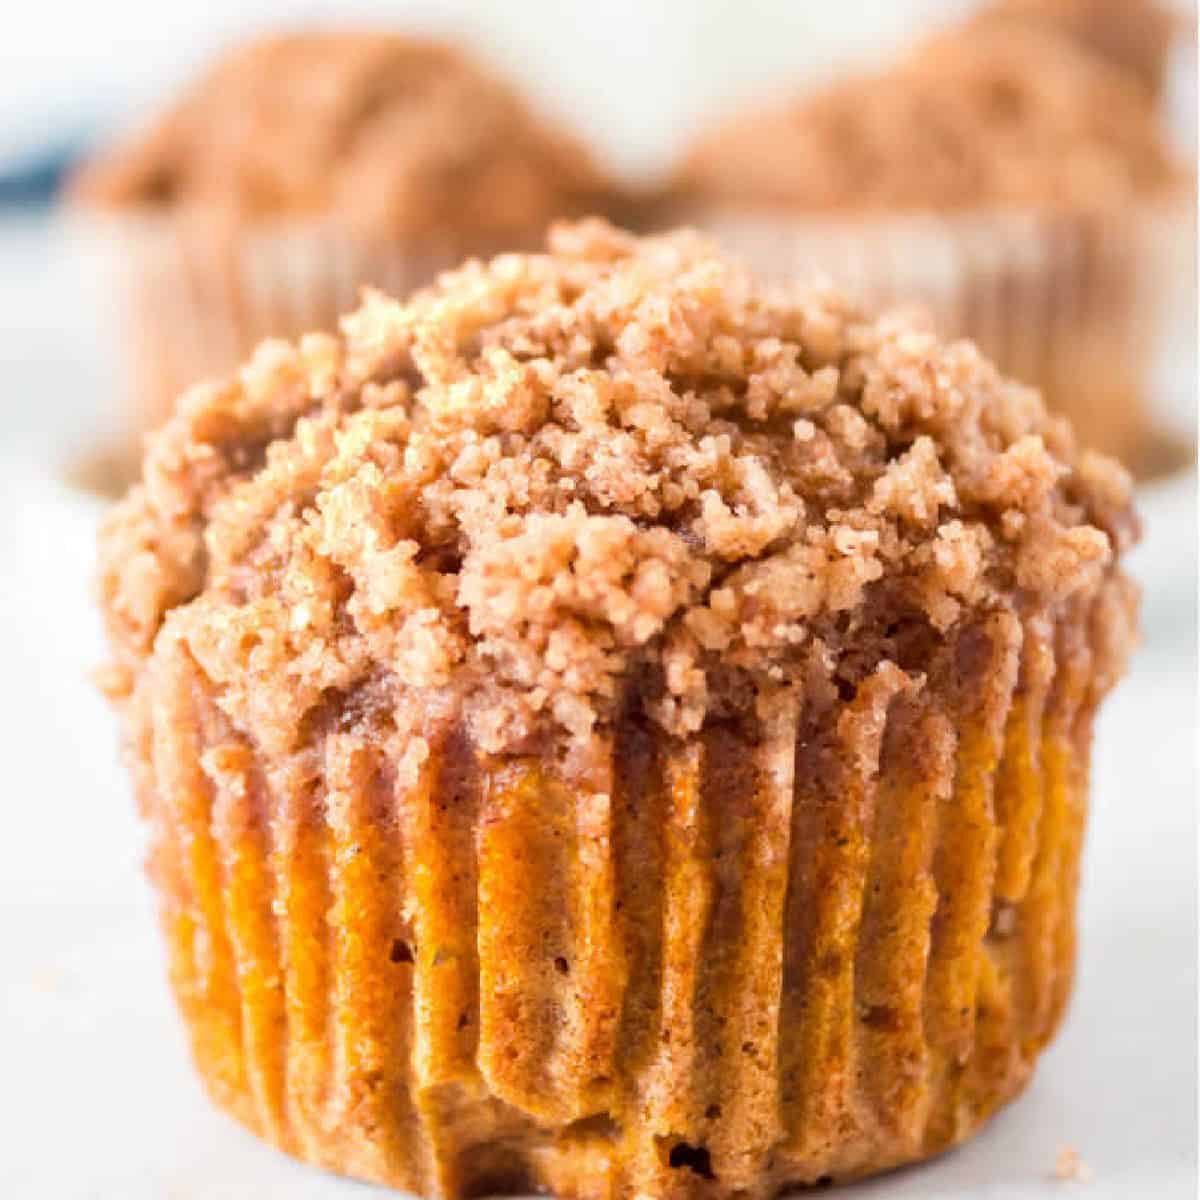 Are you ready for a delicious Pumpkin Muffin Recipe with cinnamon streusel? These pumpkin muffins are moist and delicious! 